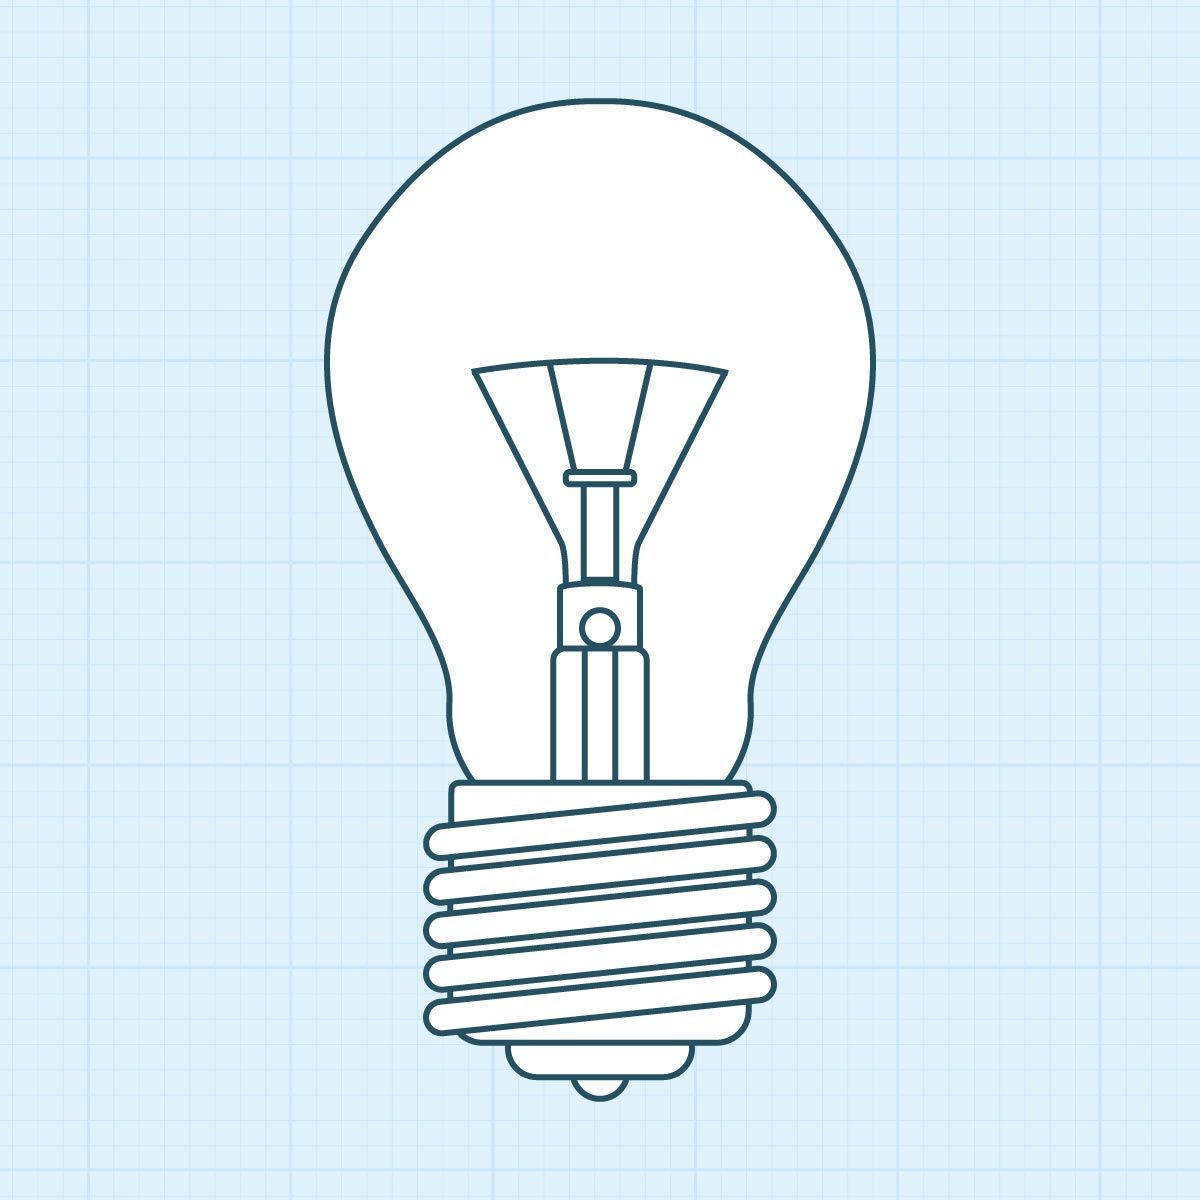 Edison Screw with a light bulb blue illustration on grid background